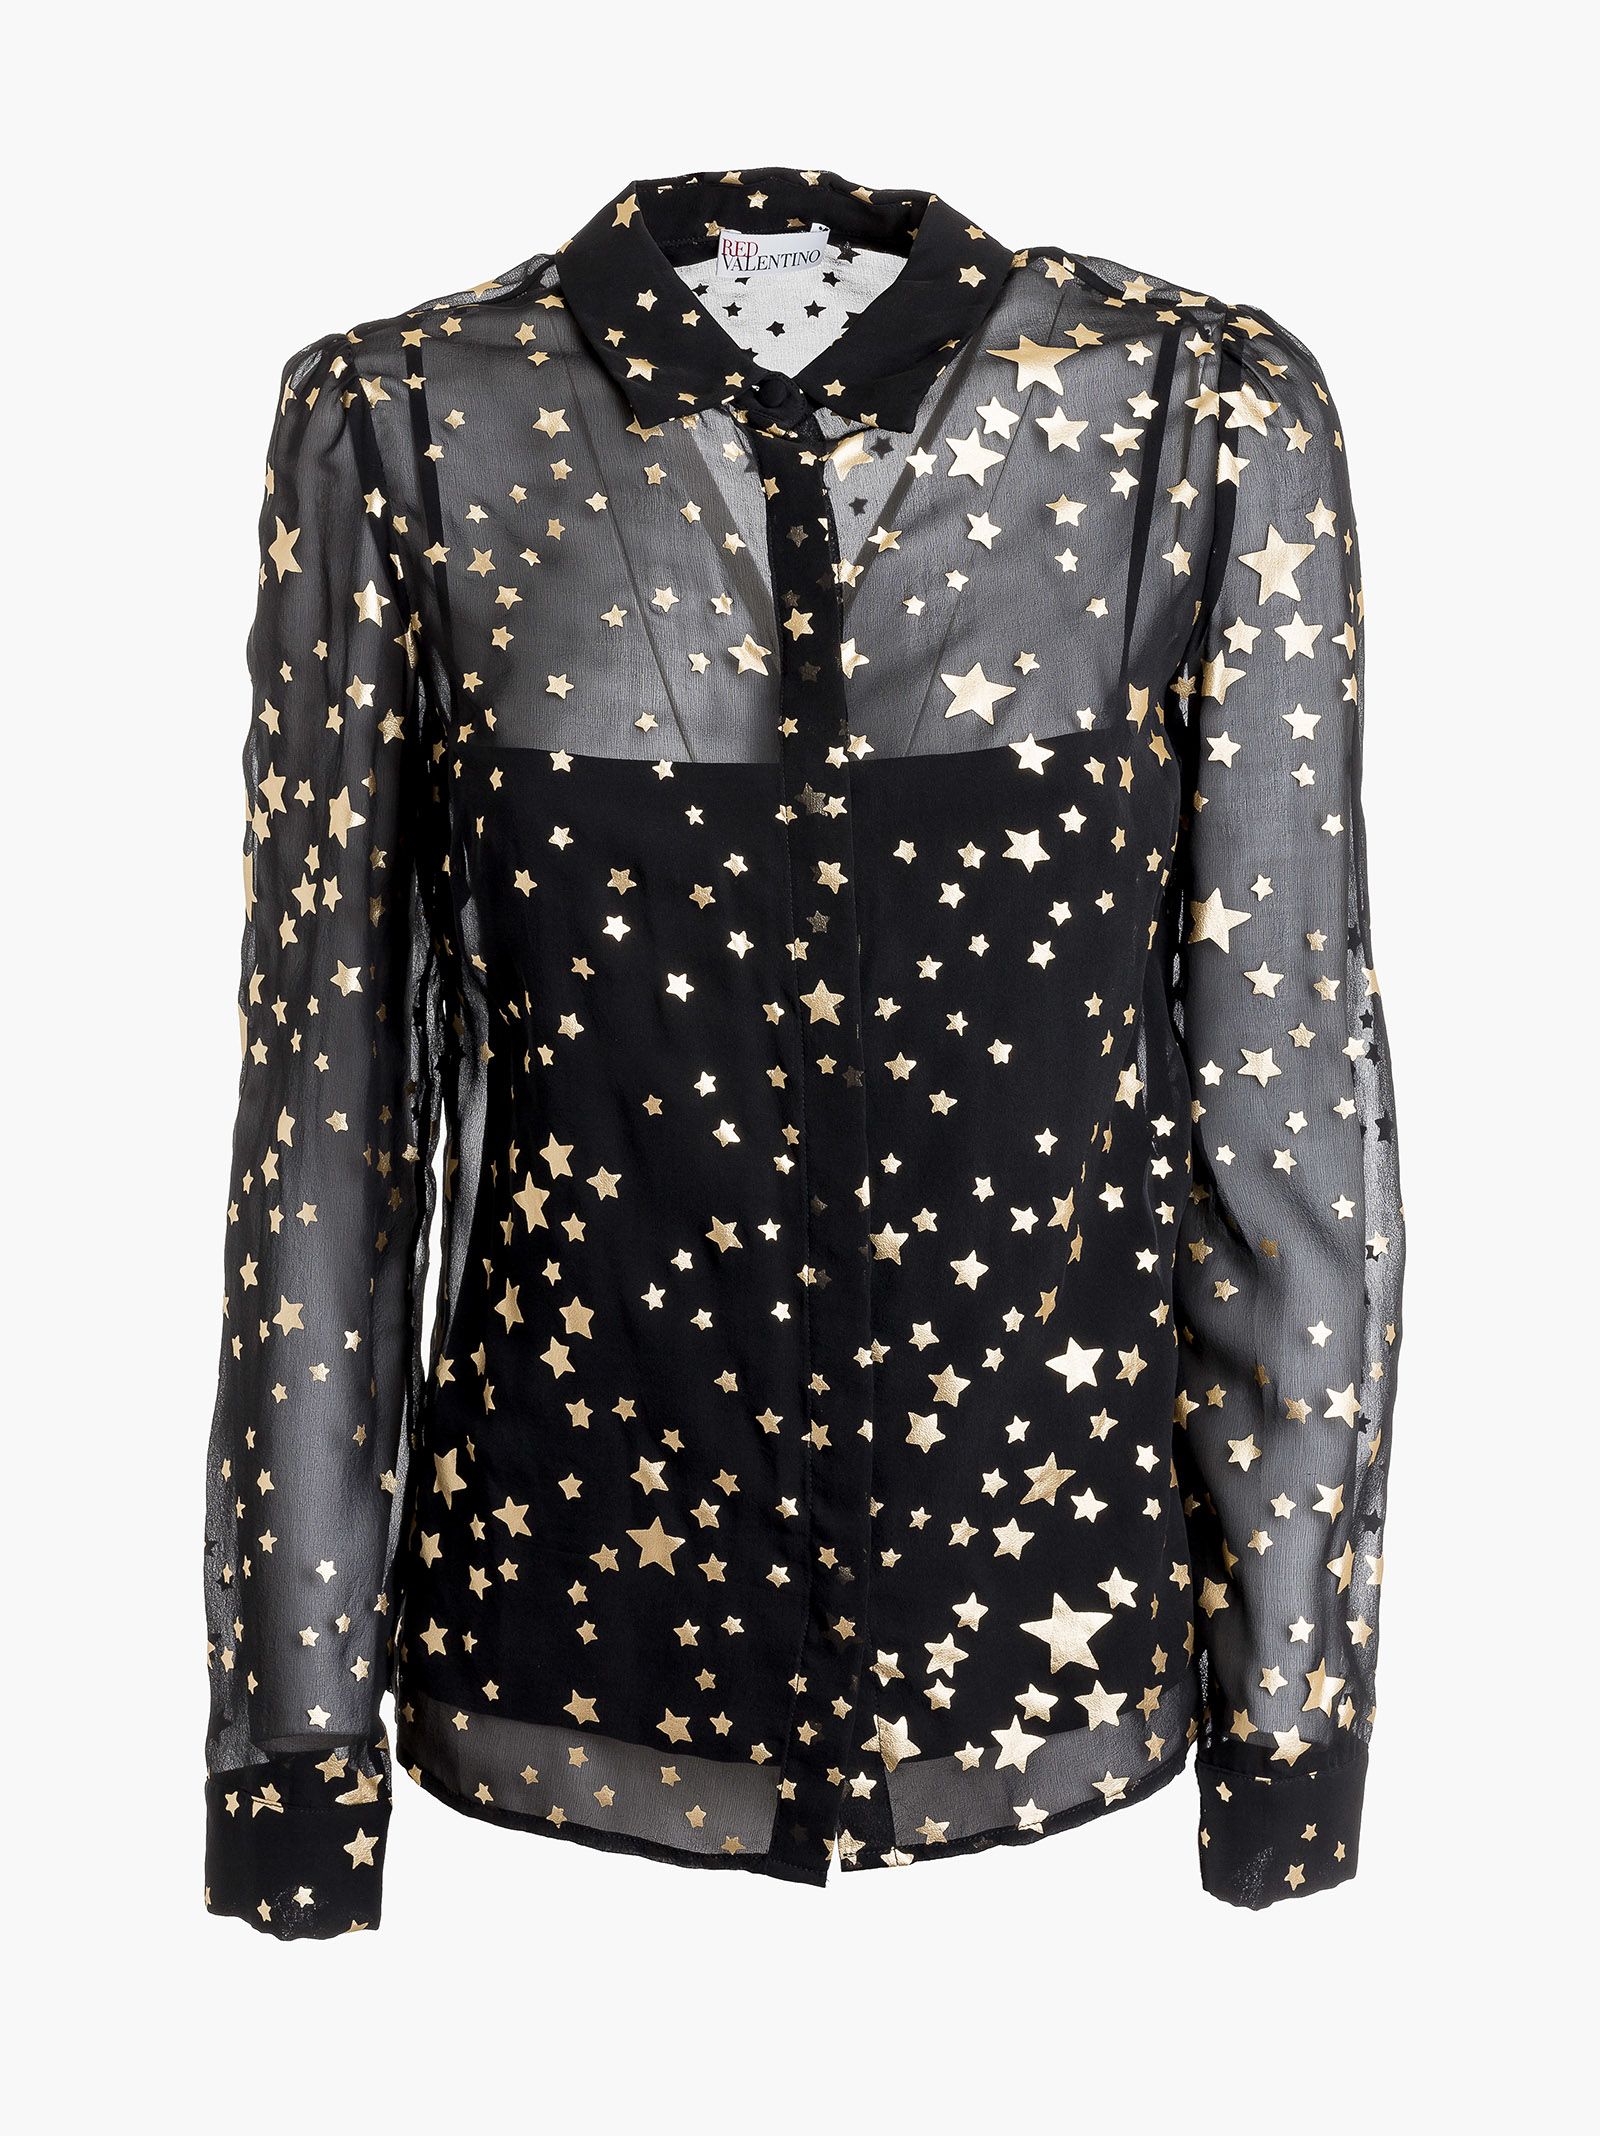 RED VALENTINO Layered Sheer Gold Foil Star Shirt in Black | ModeSens